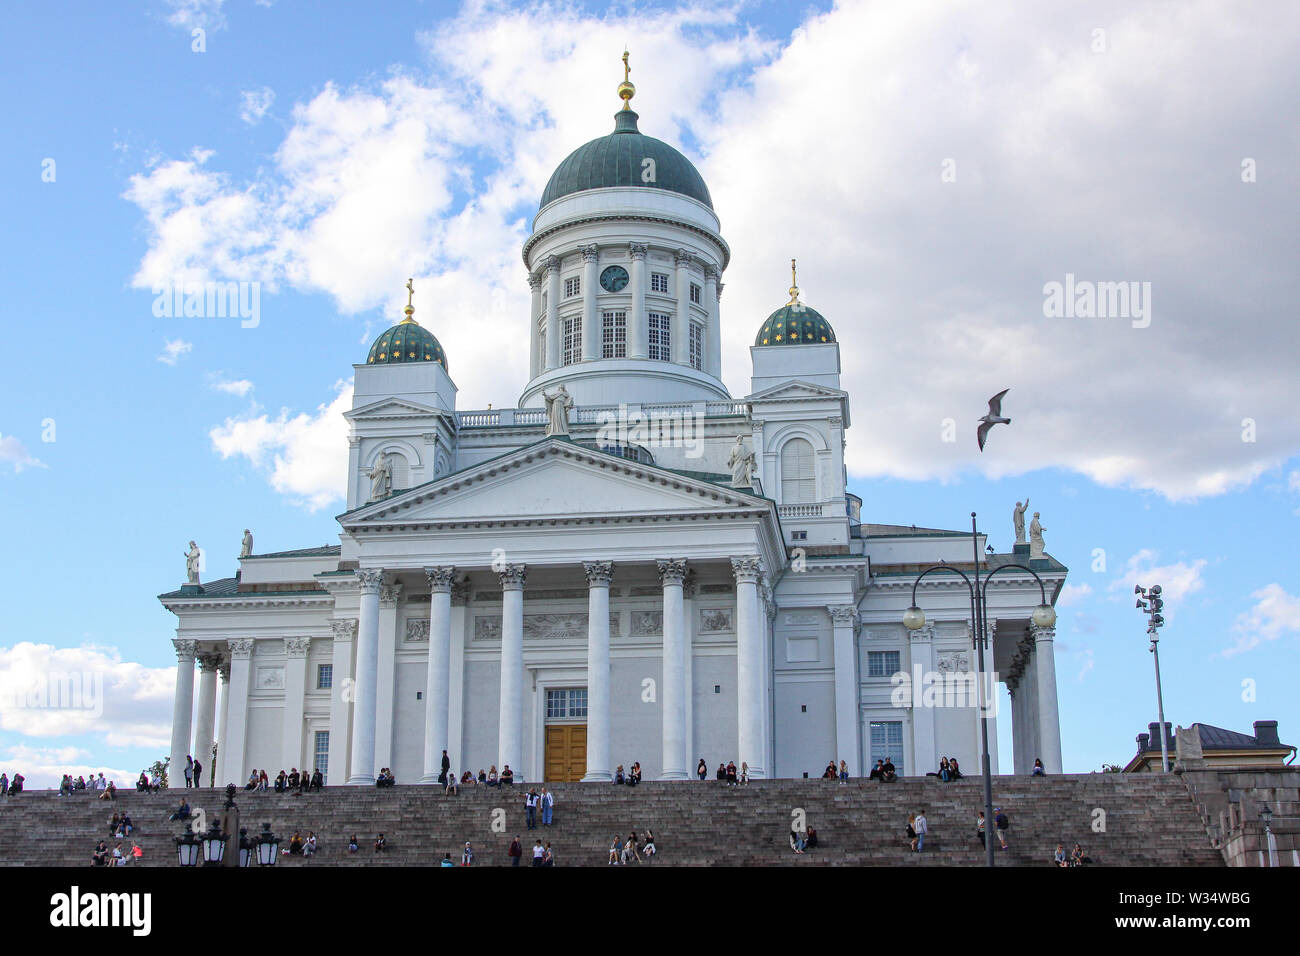 View from Helsinki Senate Square up the stairs to Helsinki Cathedral | Helsinki Cathedral is a distinctive landmark, with its tall, green dome surroun Stock Photo